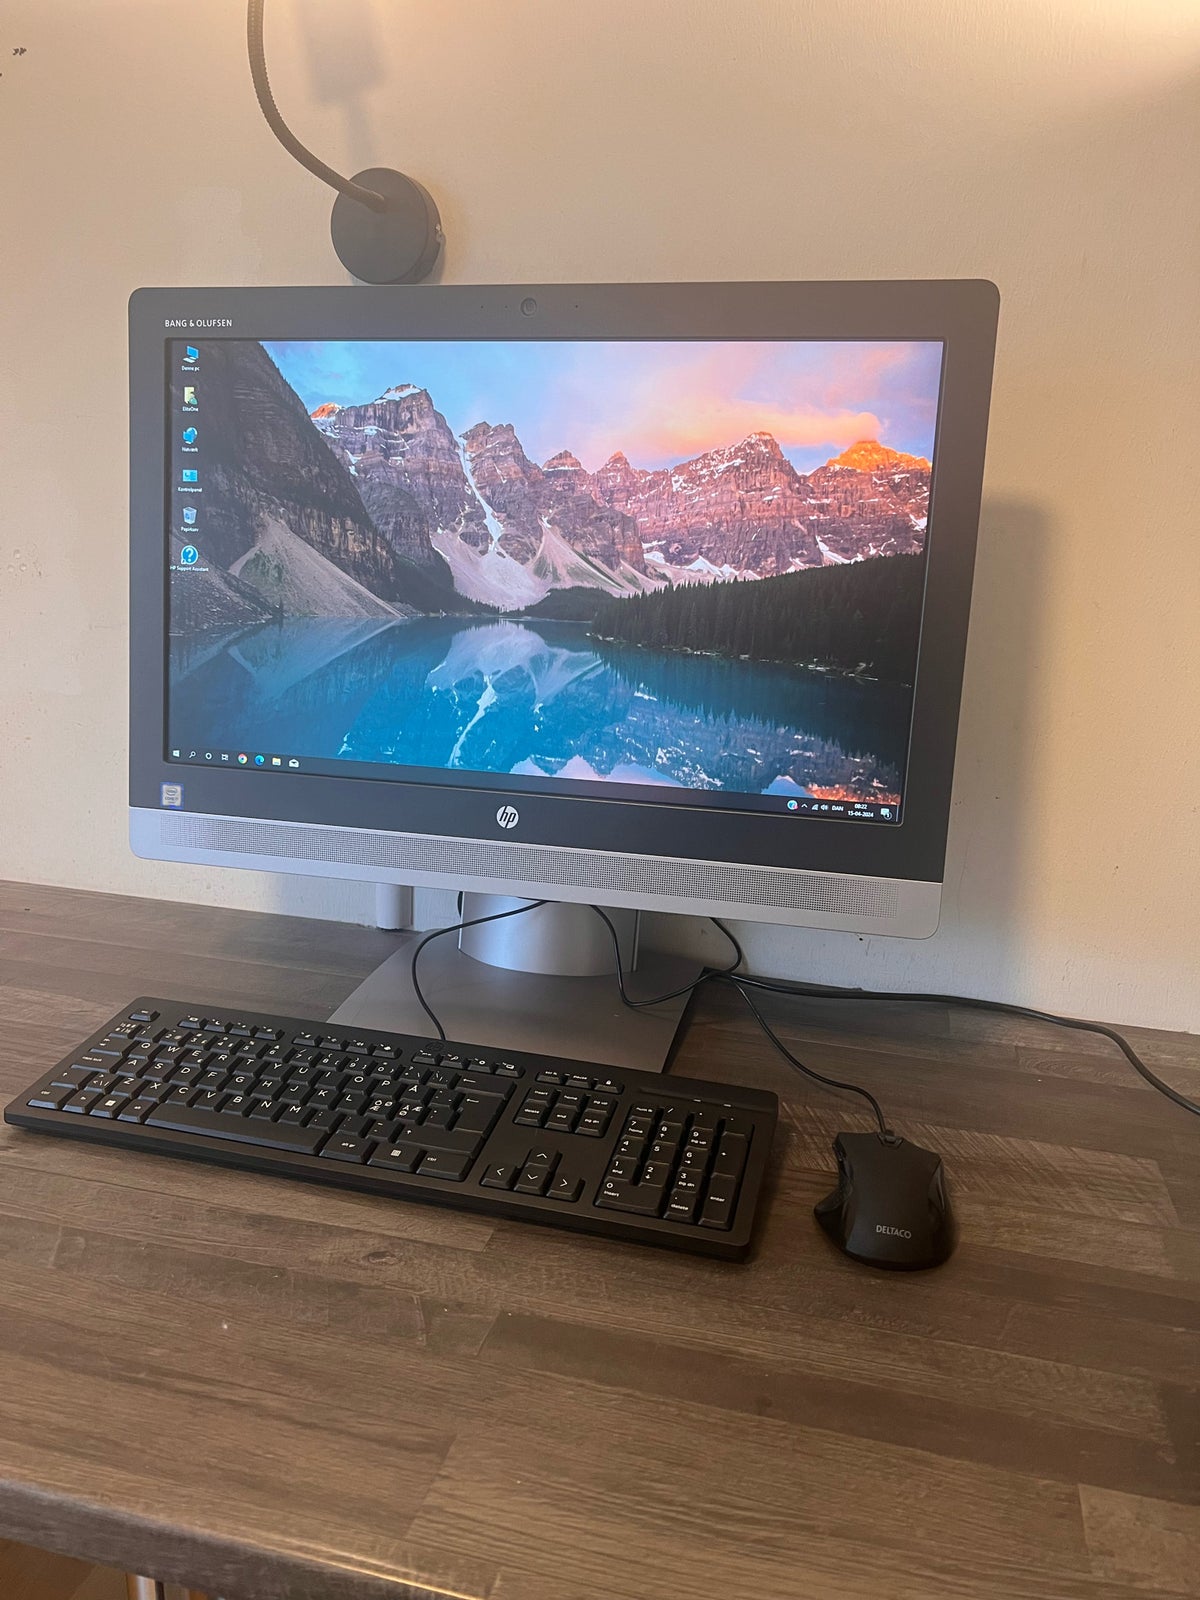 HP, 24” HP ELITE1 B&O EDITION ALL-IN-ONE PC, God